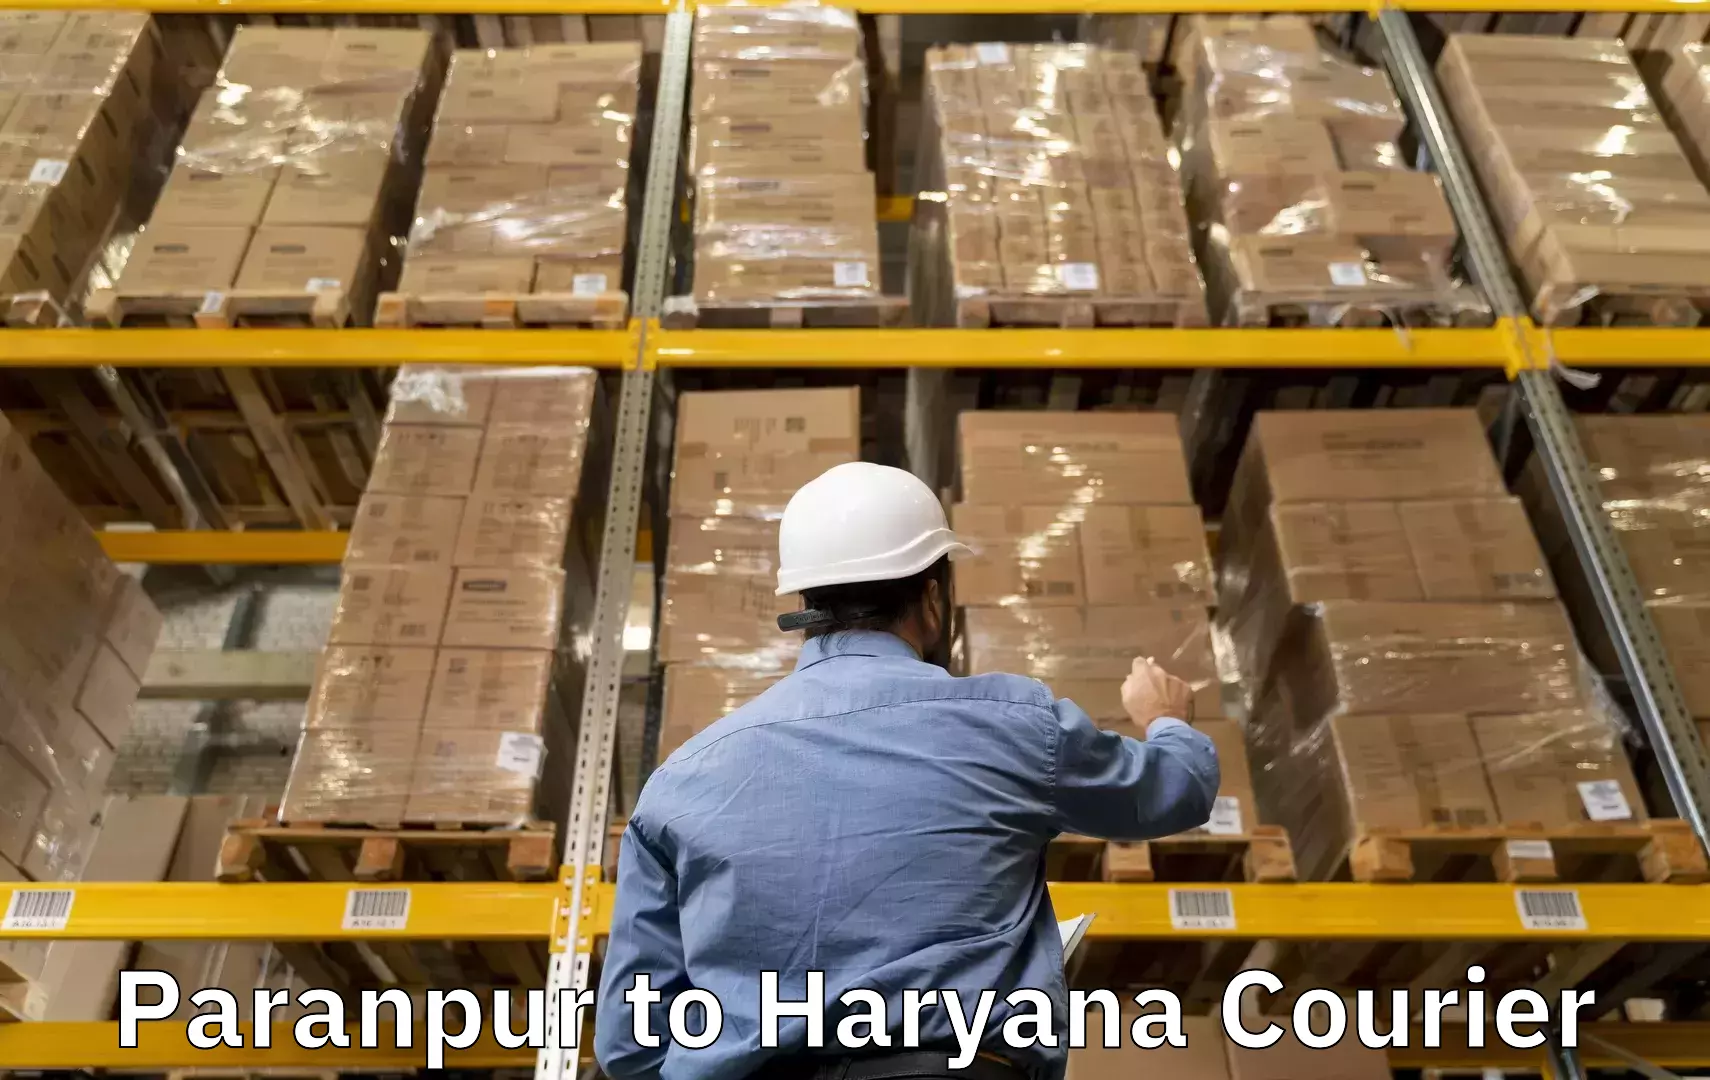 Baggage delivery scheduling in Paranpur to Gurgaon